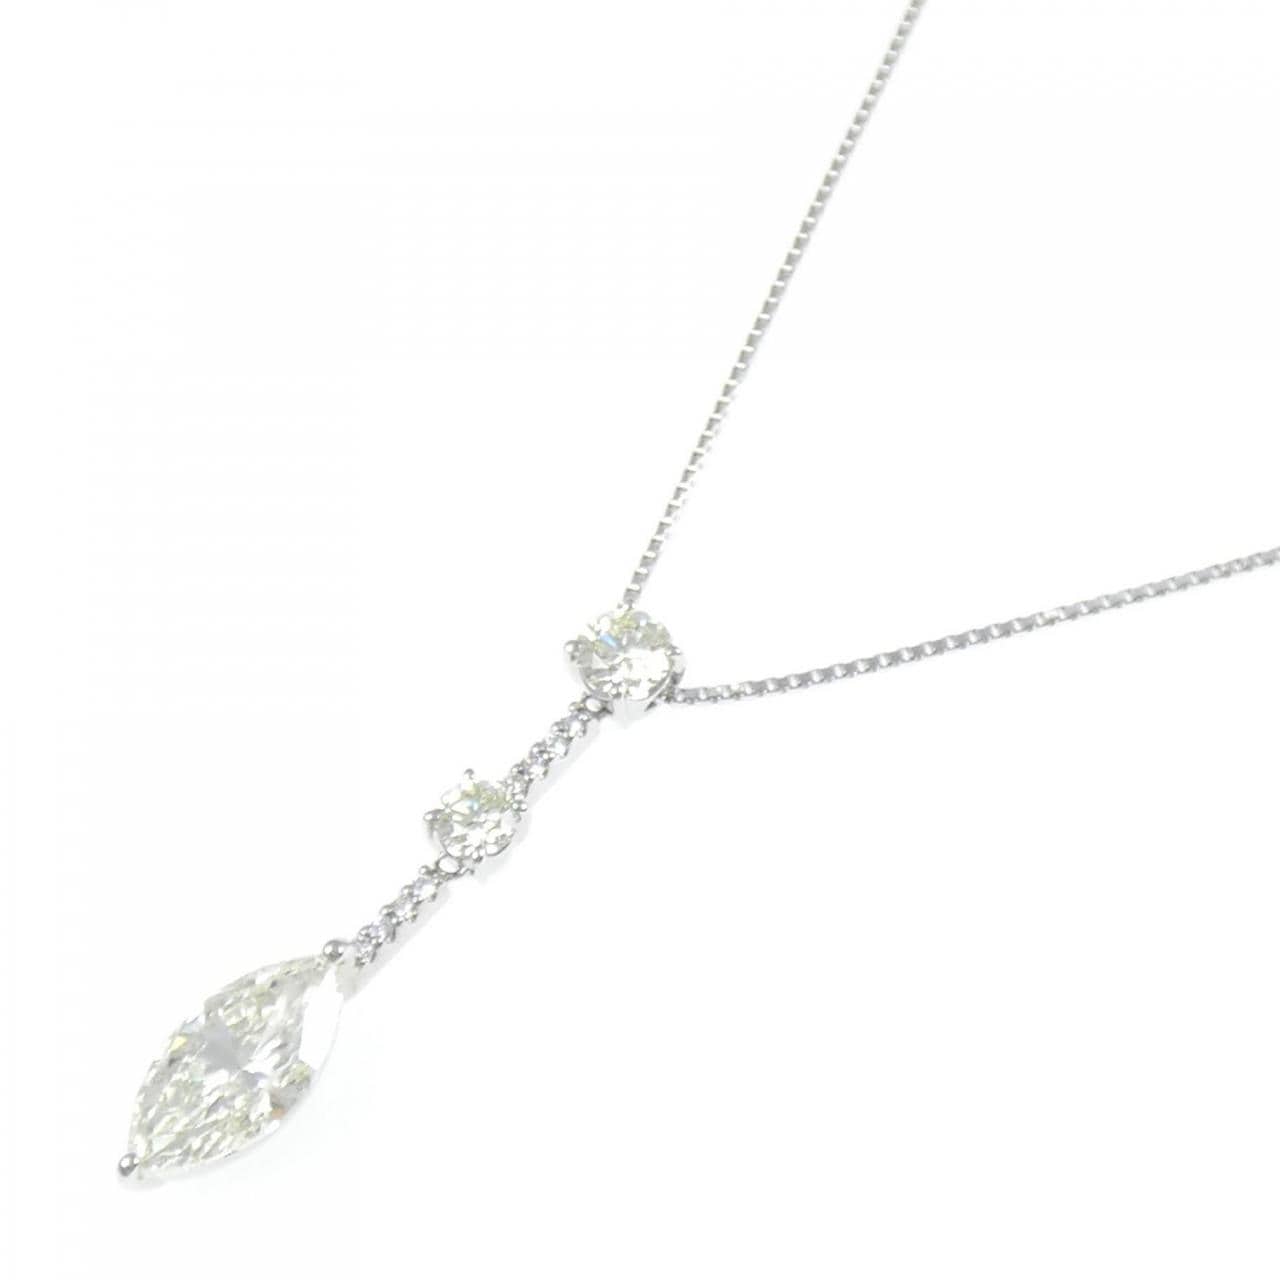 PT Diamond Necklace 3.002CT VLY SI2 Marquise Cut /0.511CT LY VS1 VG /0.305CT LY VS1 VG